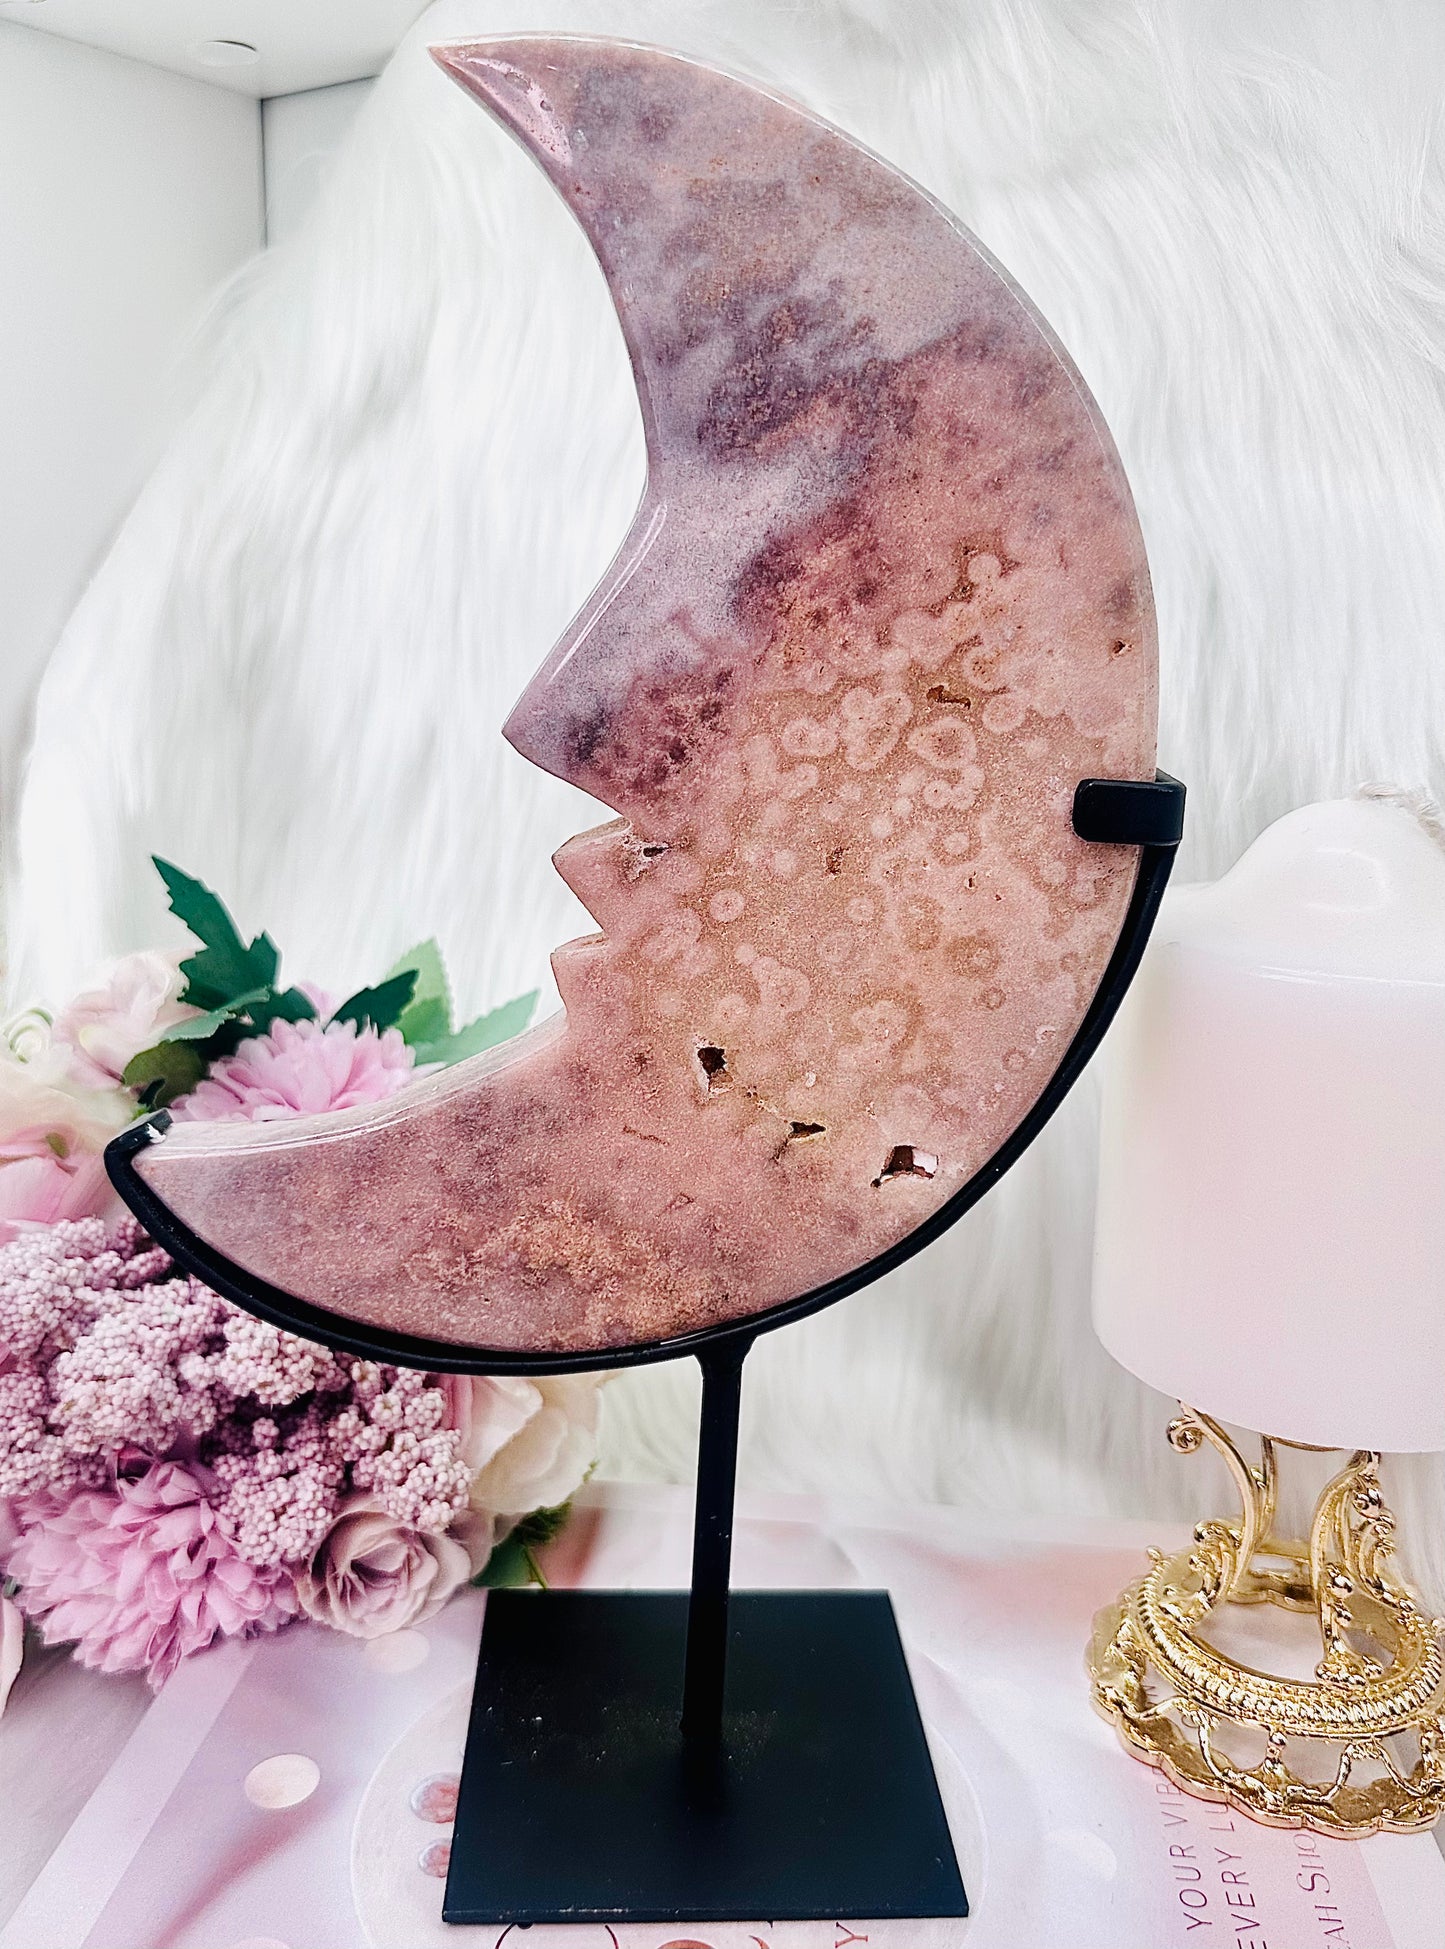 Masterpiece Alert!!! Huge Classy & Fabulous 27cm 1.05Kg Pink Amethyst Carved Druzy Moon On Stand From Brazil